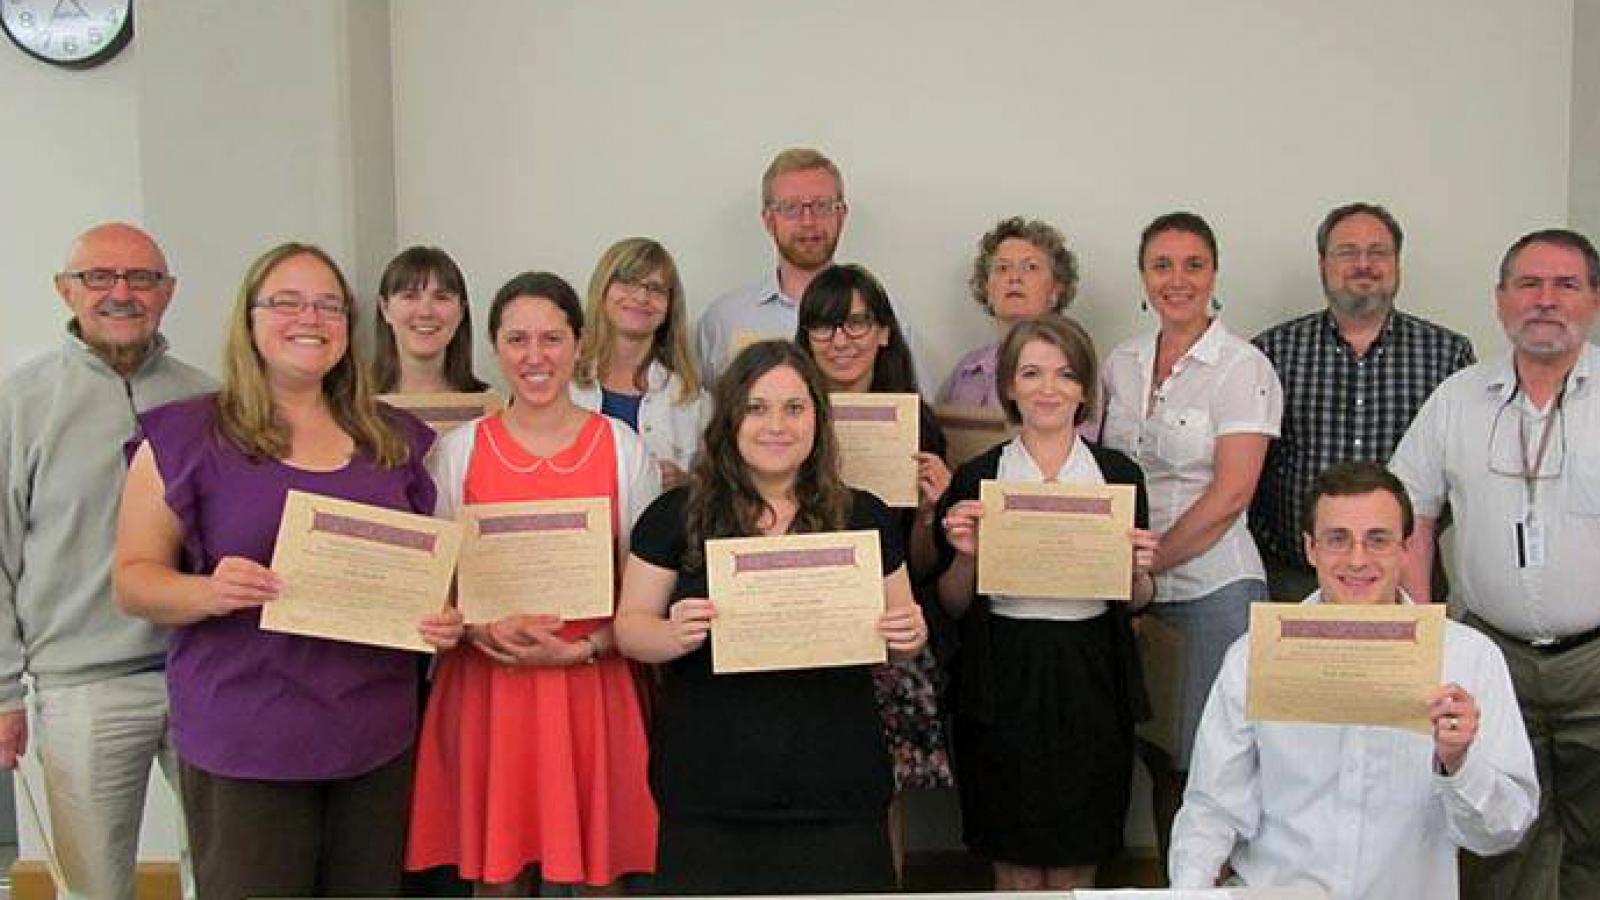 2013 participants display their certificates, received for completing the institute 